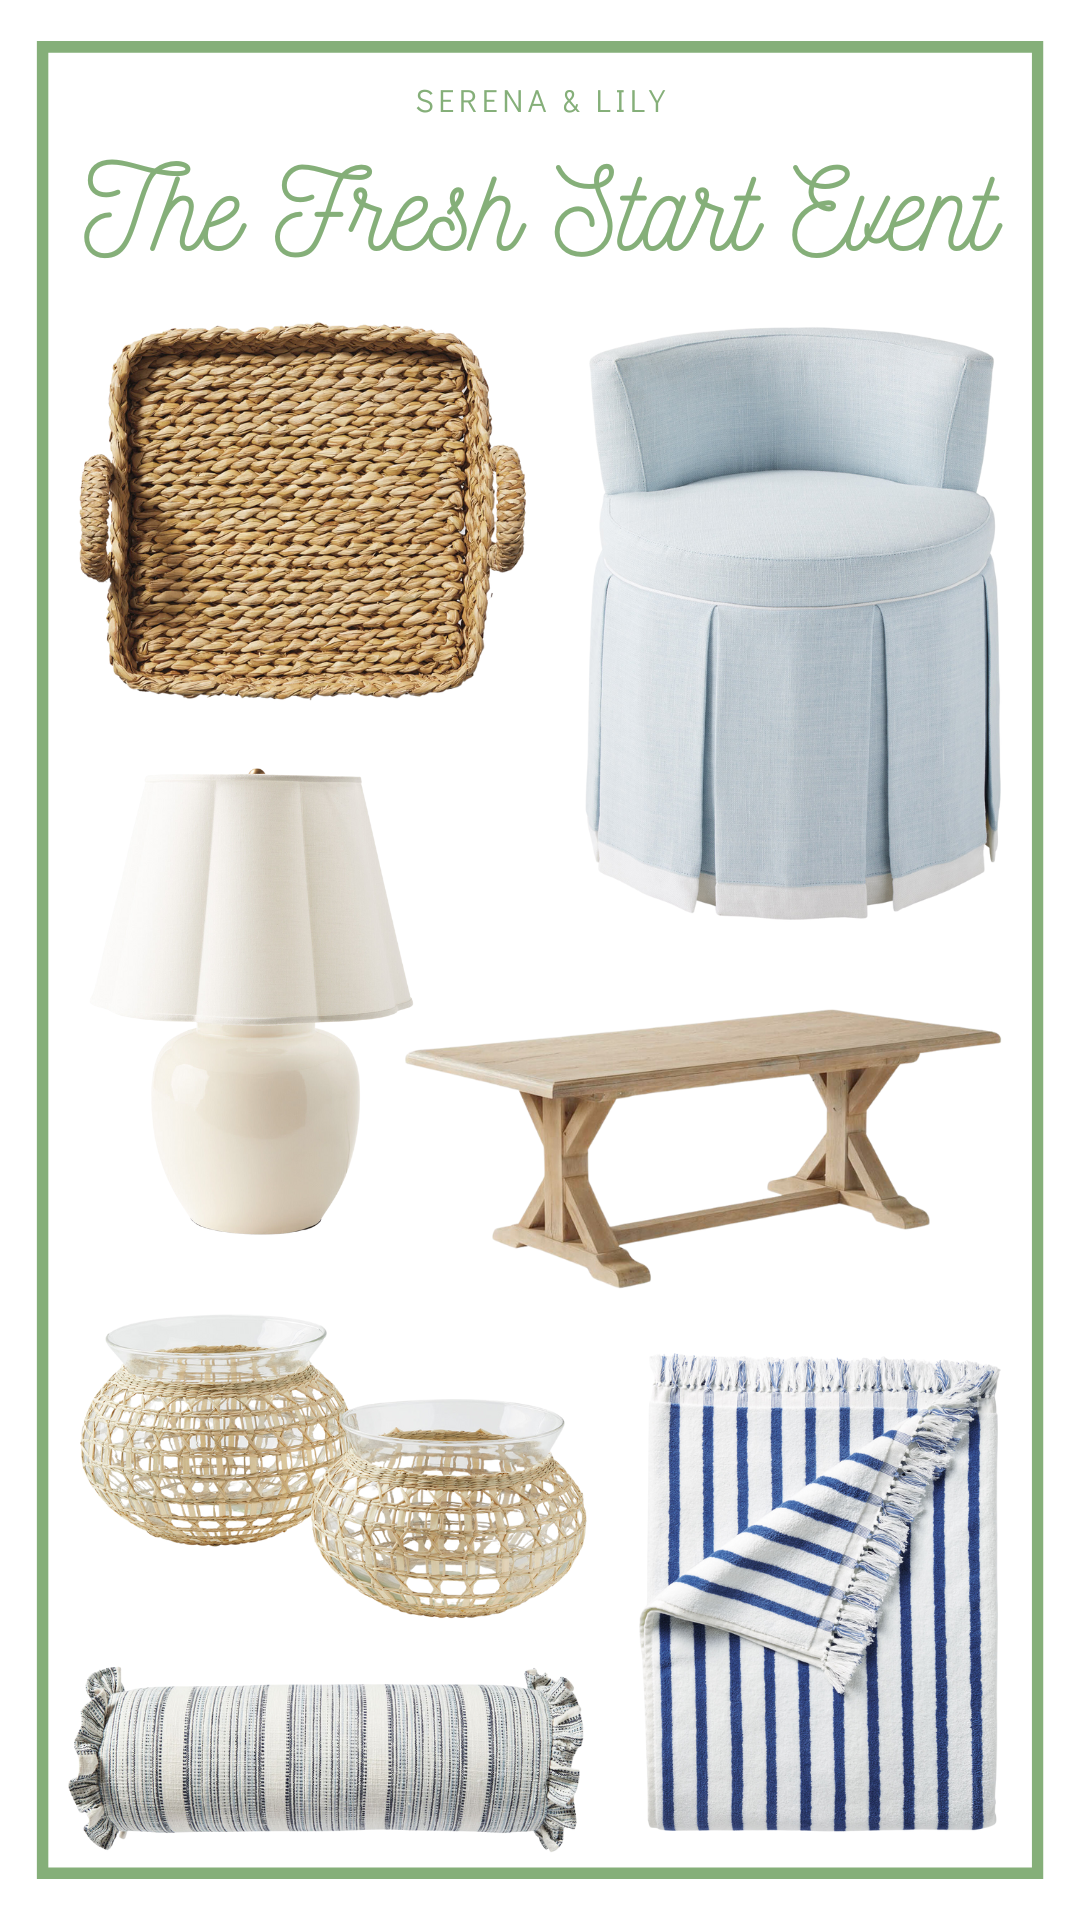 Desiree Leone of Beautifully Seaside shares all the details on how to update your home with this amazing sale at Serena & Lily!